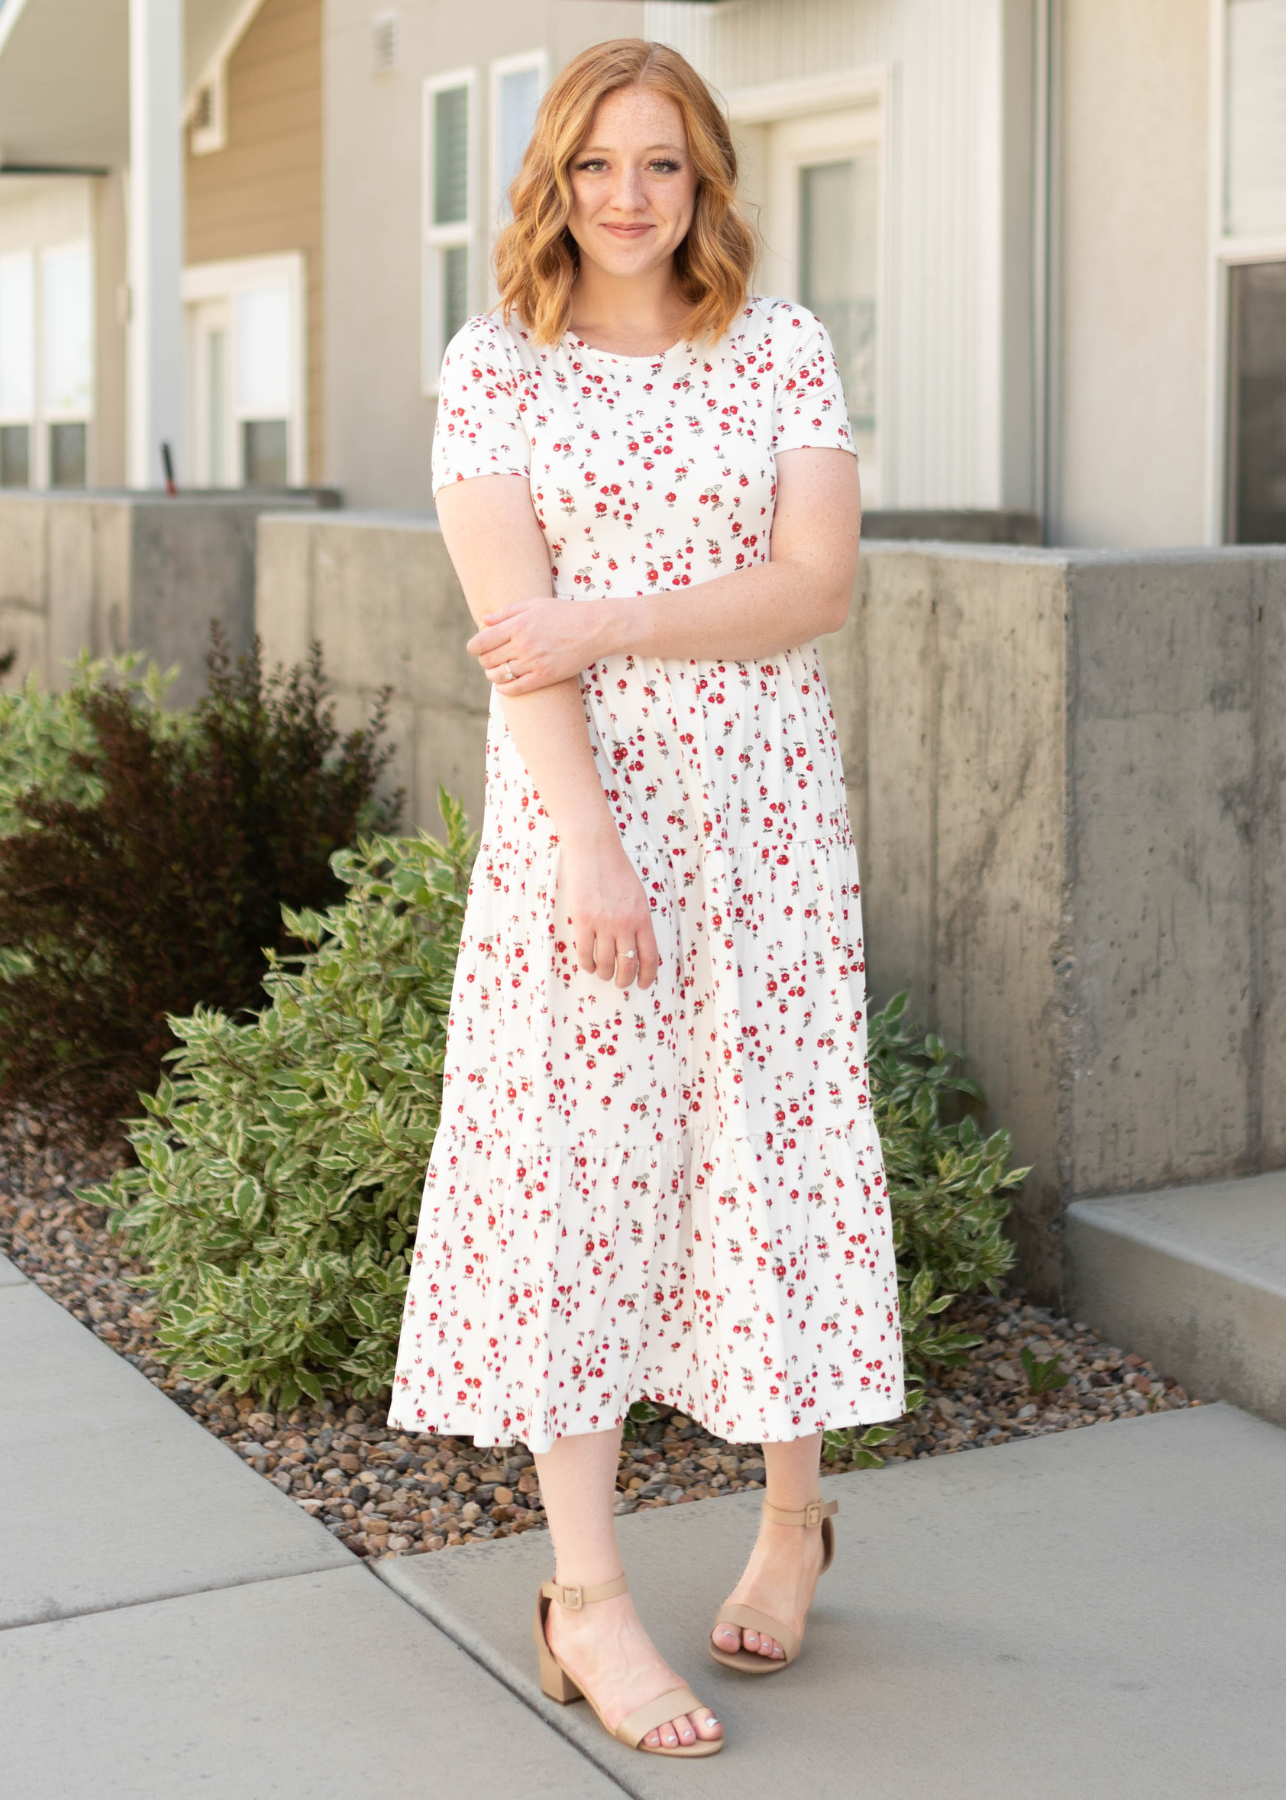 Short sleeve knit white dress with little flowers